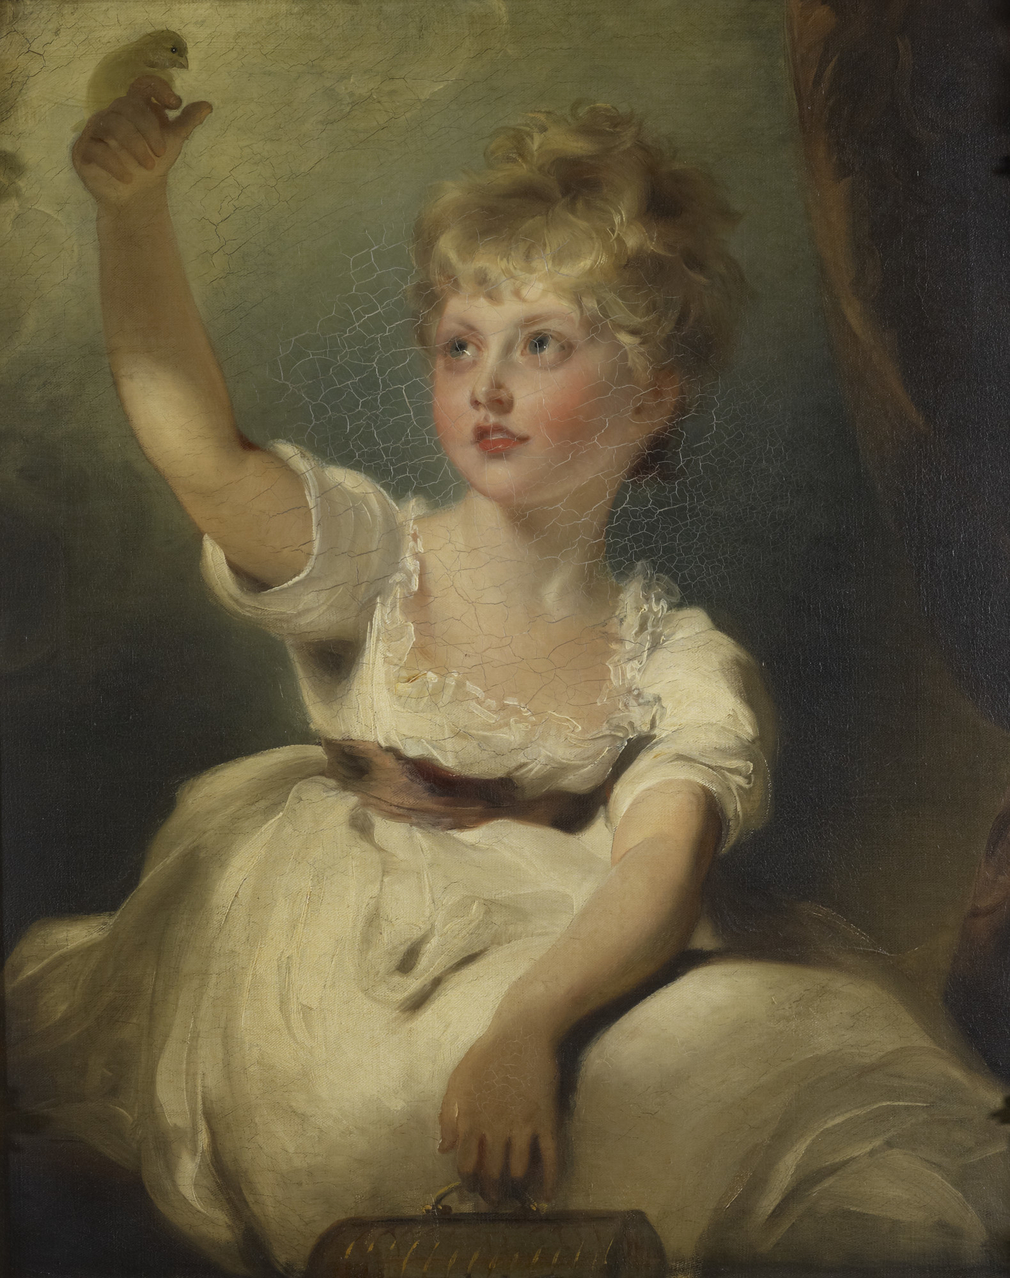 princess_charlotte_of_wales_as_a_child_by_sir_thomas_lawrence_c_1801-1806.jpg